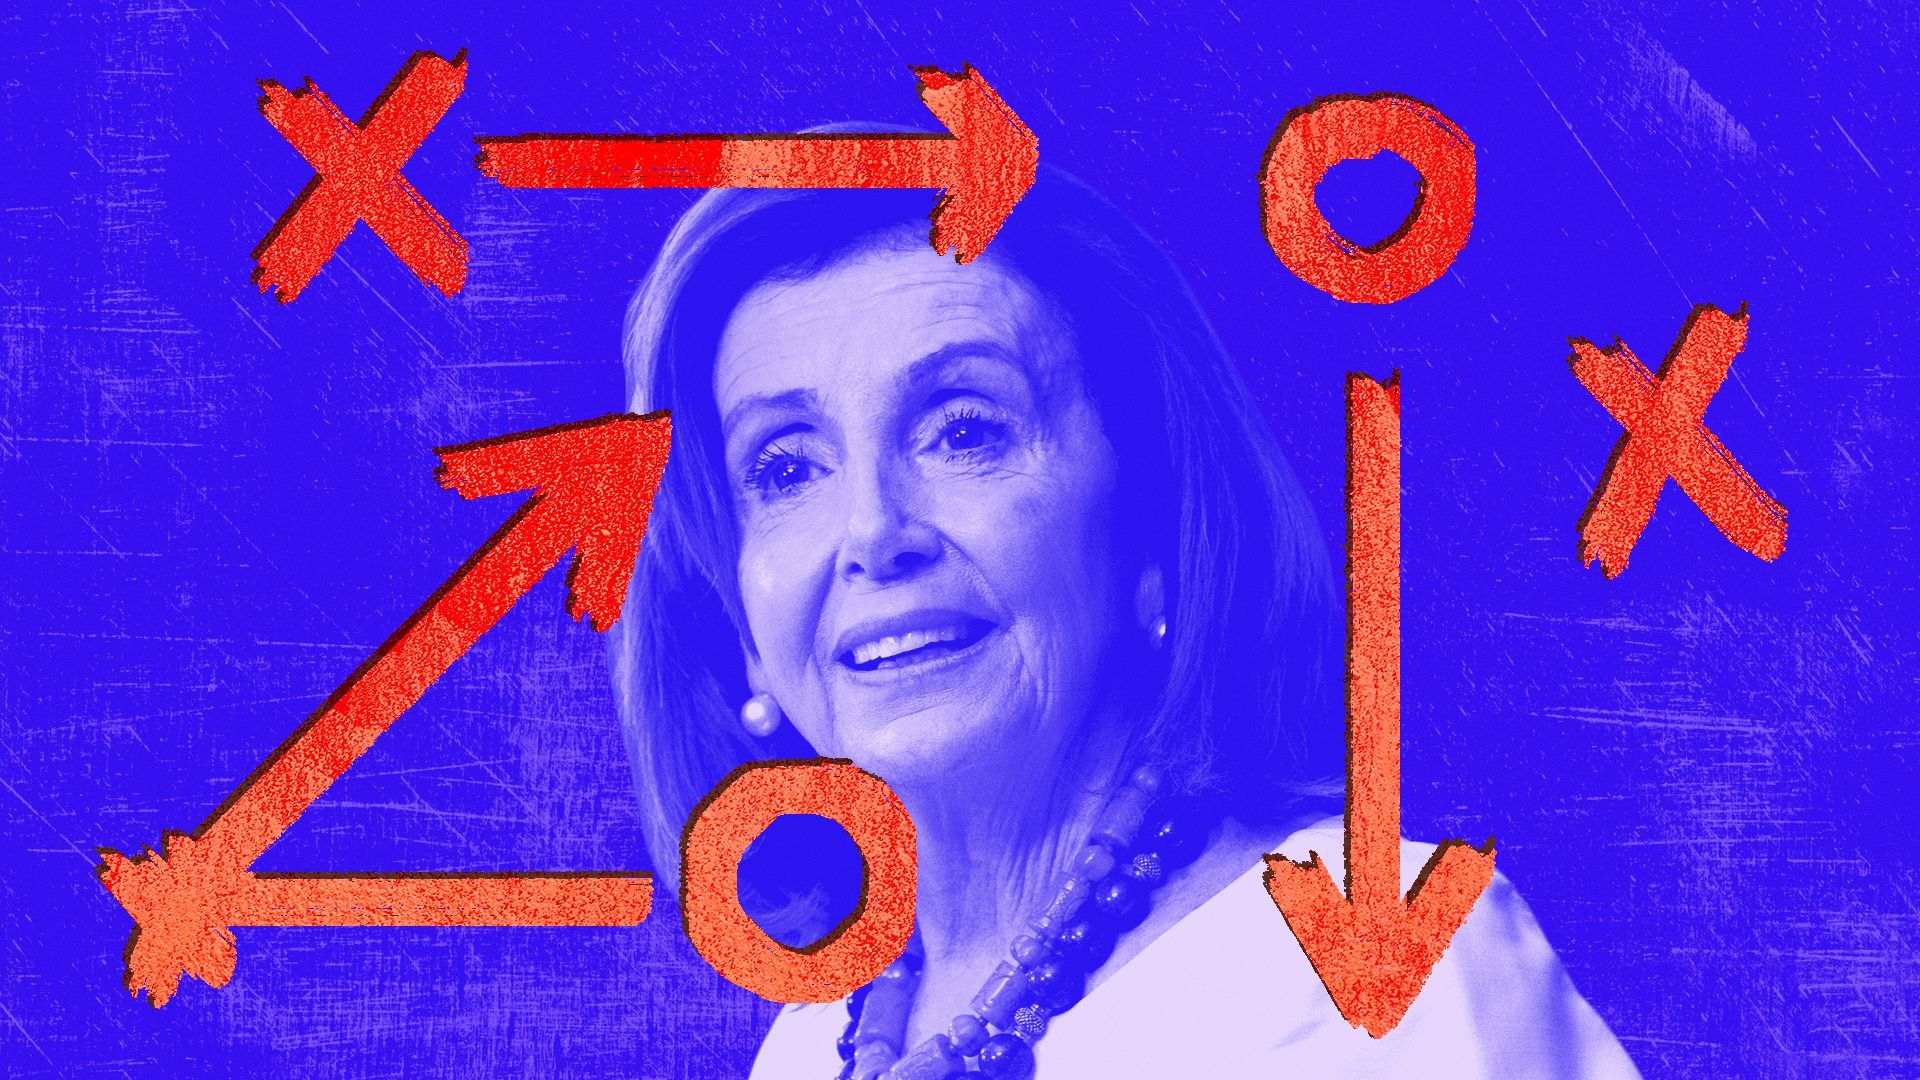 Photo illustration of Nancy Pelosi's photo surrounded by sports game strategy x's and arrows